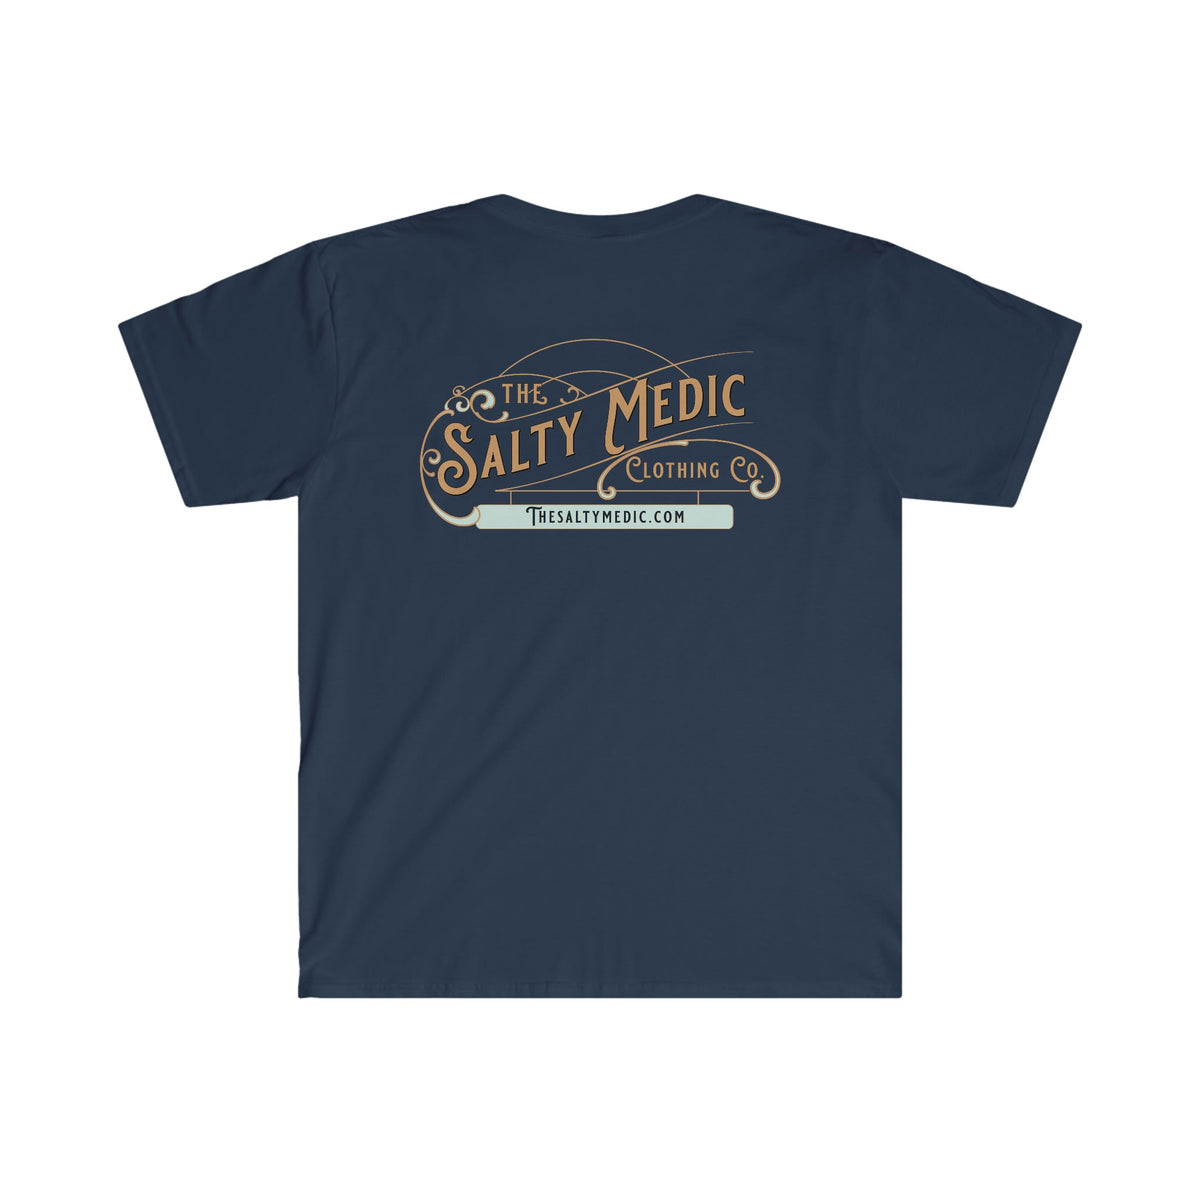 I Am The Weee Wooo Driver Men's Softstyle T-Shirt - Salty Medic Clothing Co.